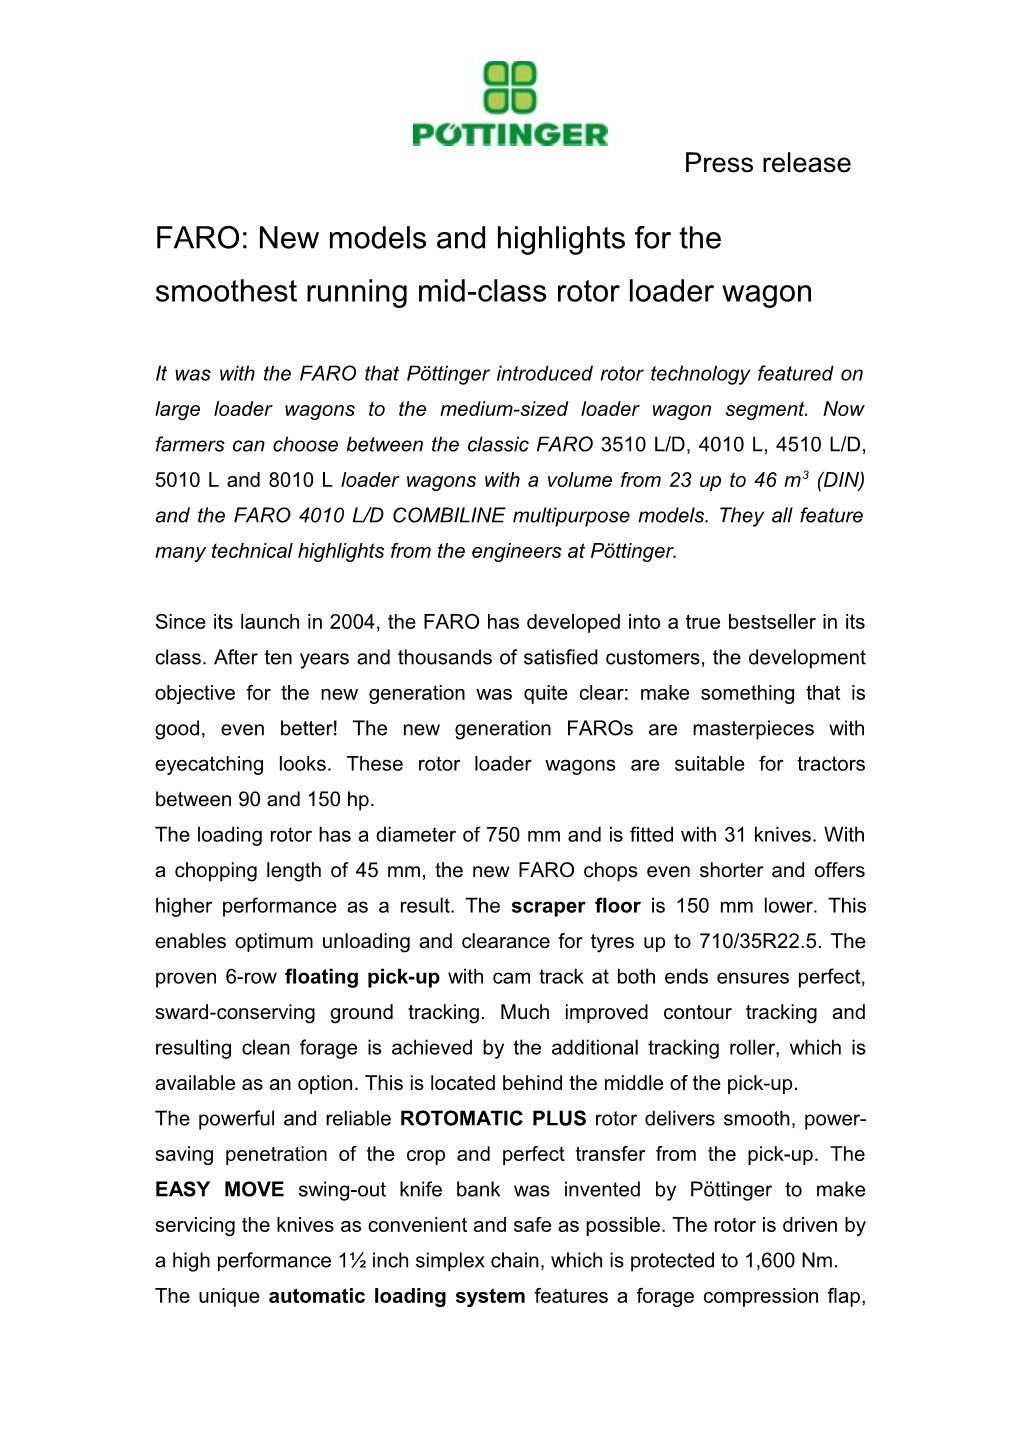 FARO: New Models and Highlights for The